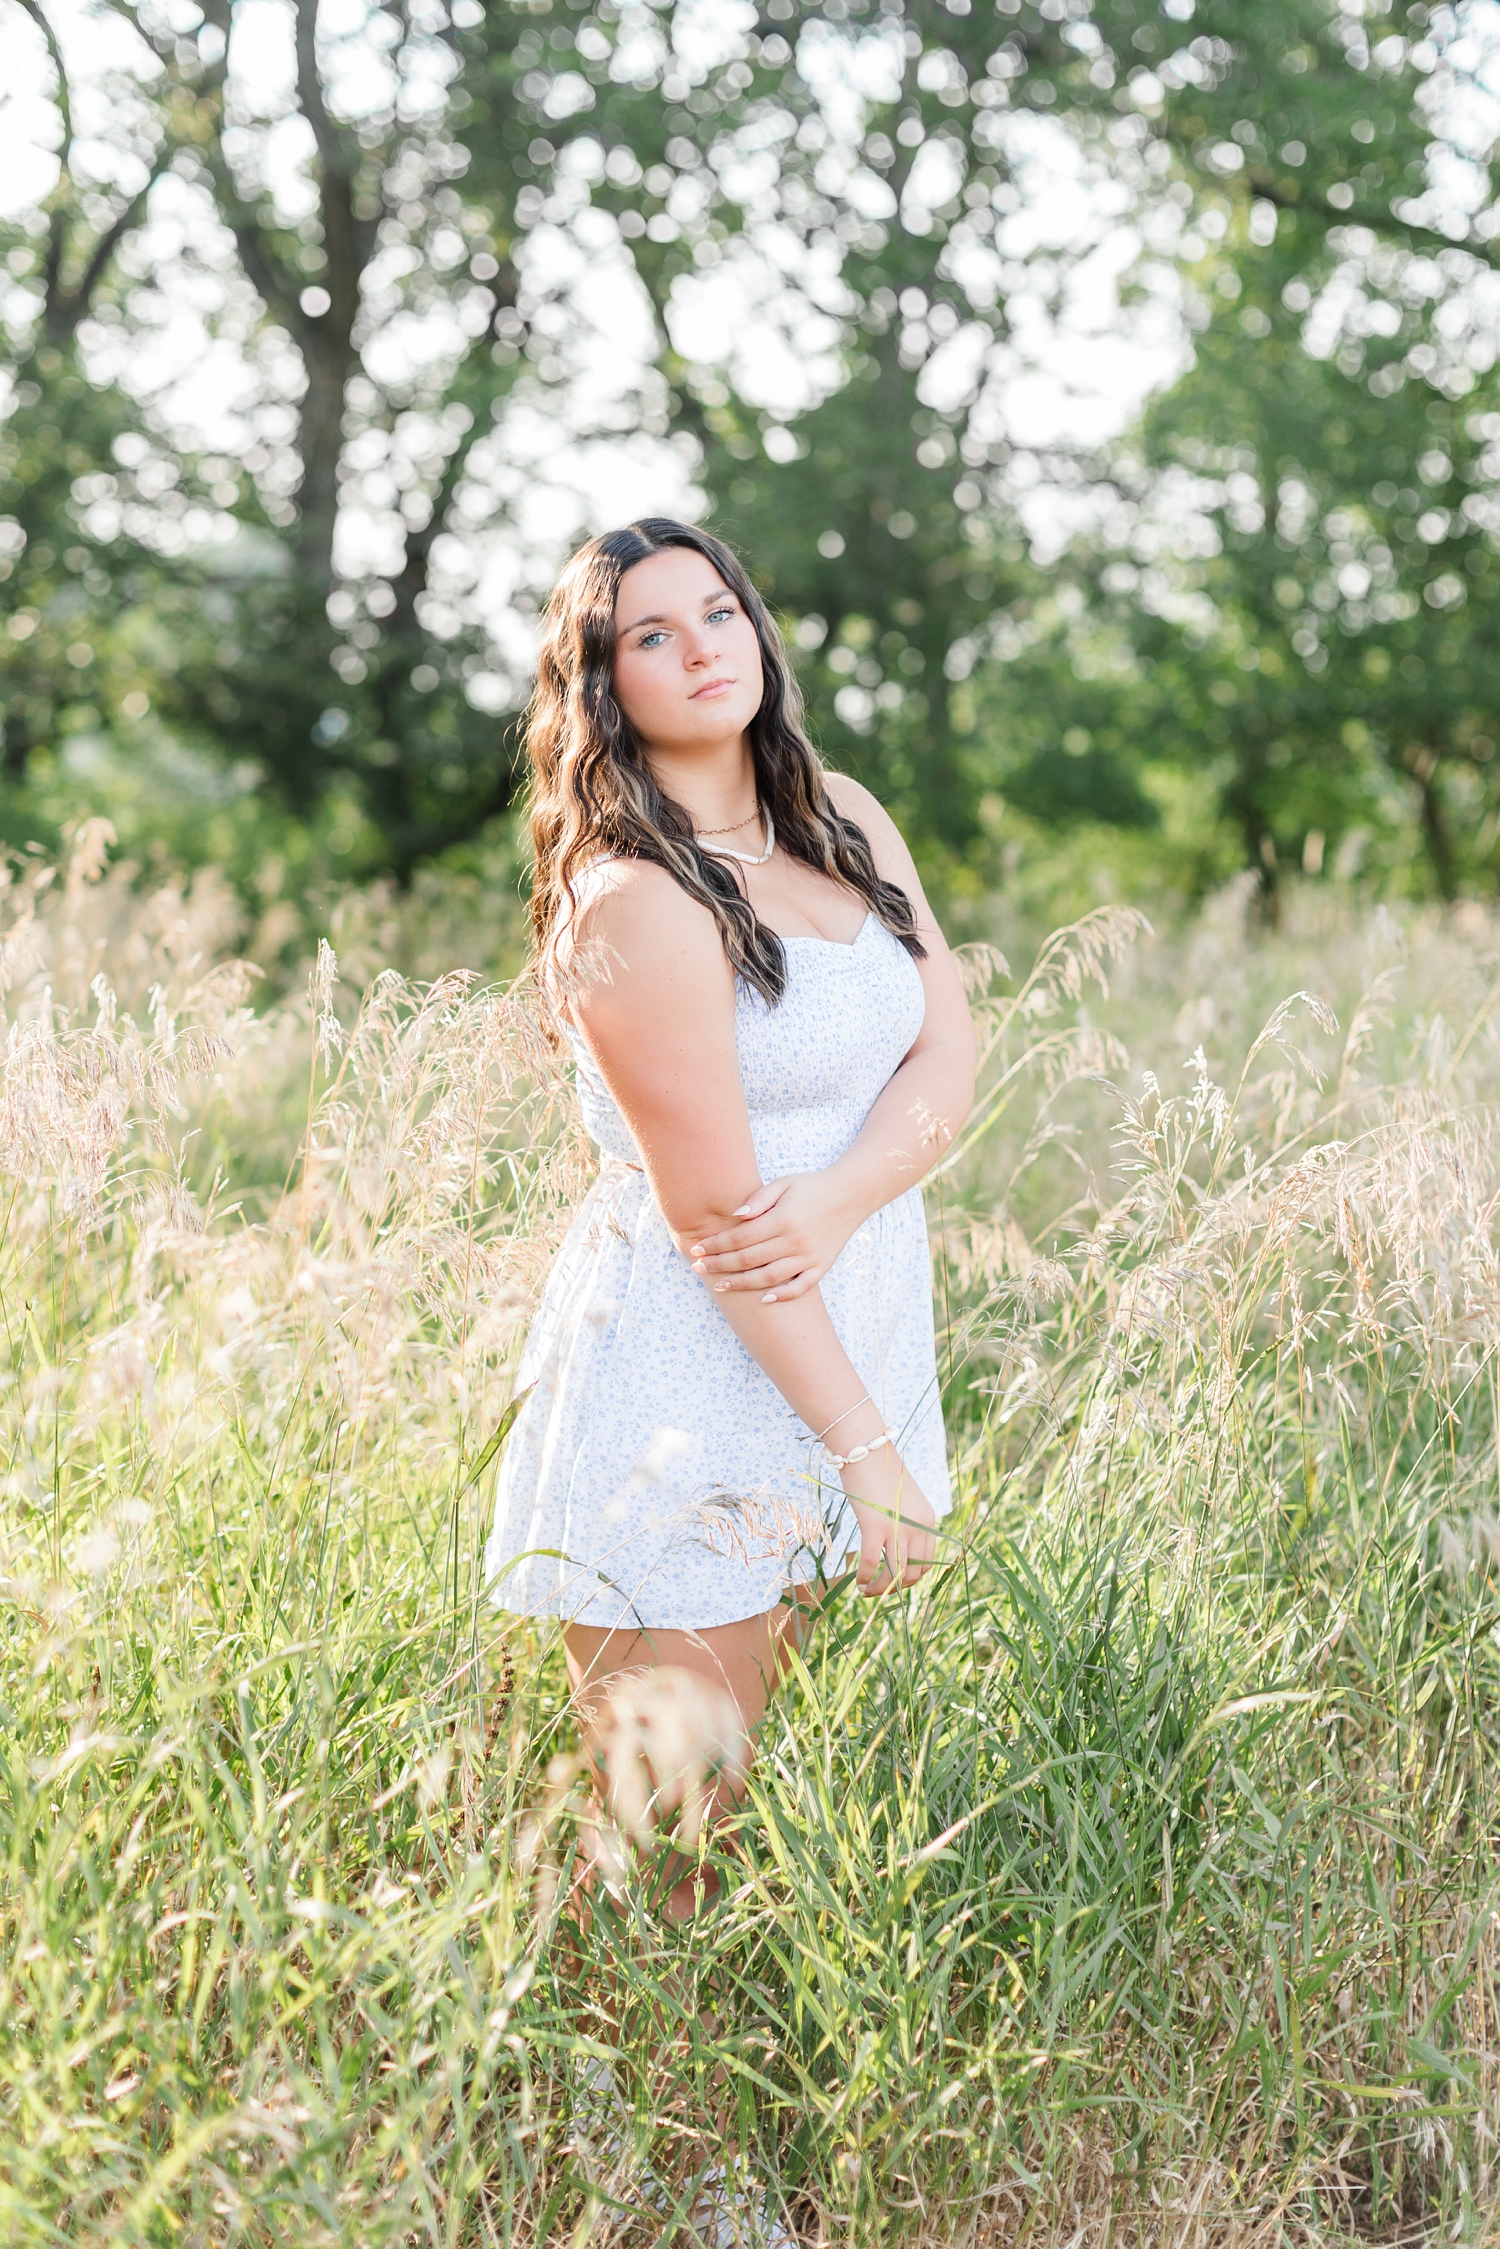 Lily stands in the middle of a grassy field | CB Studio